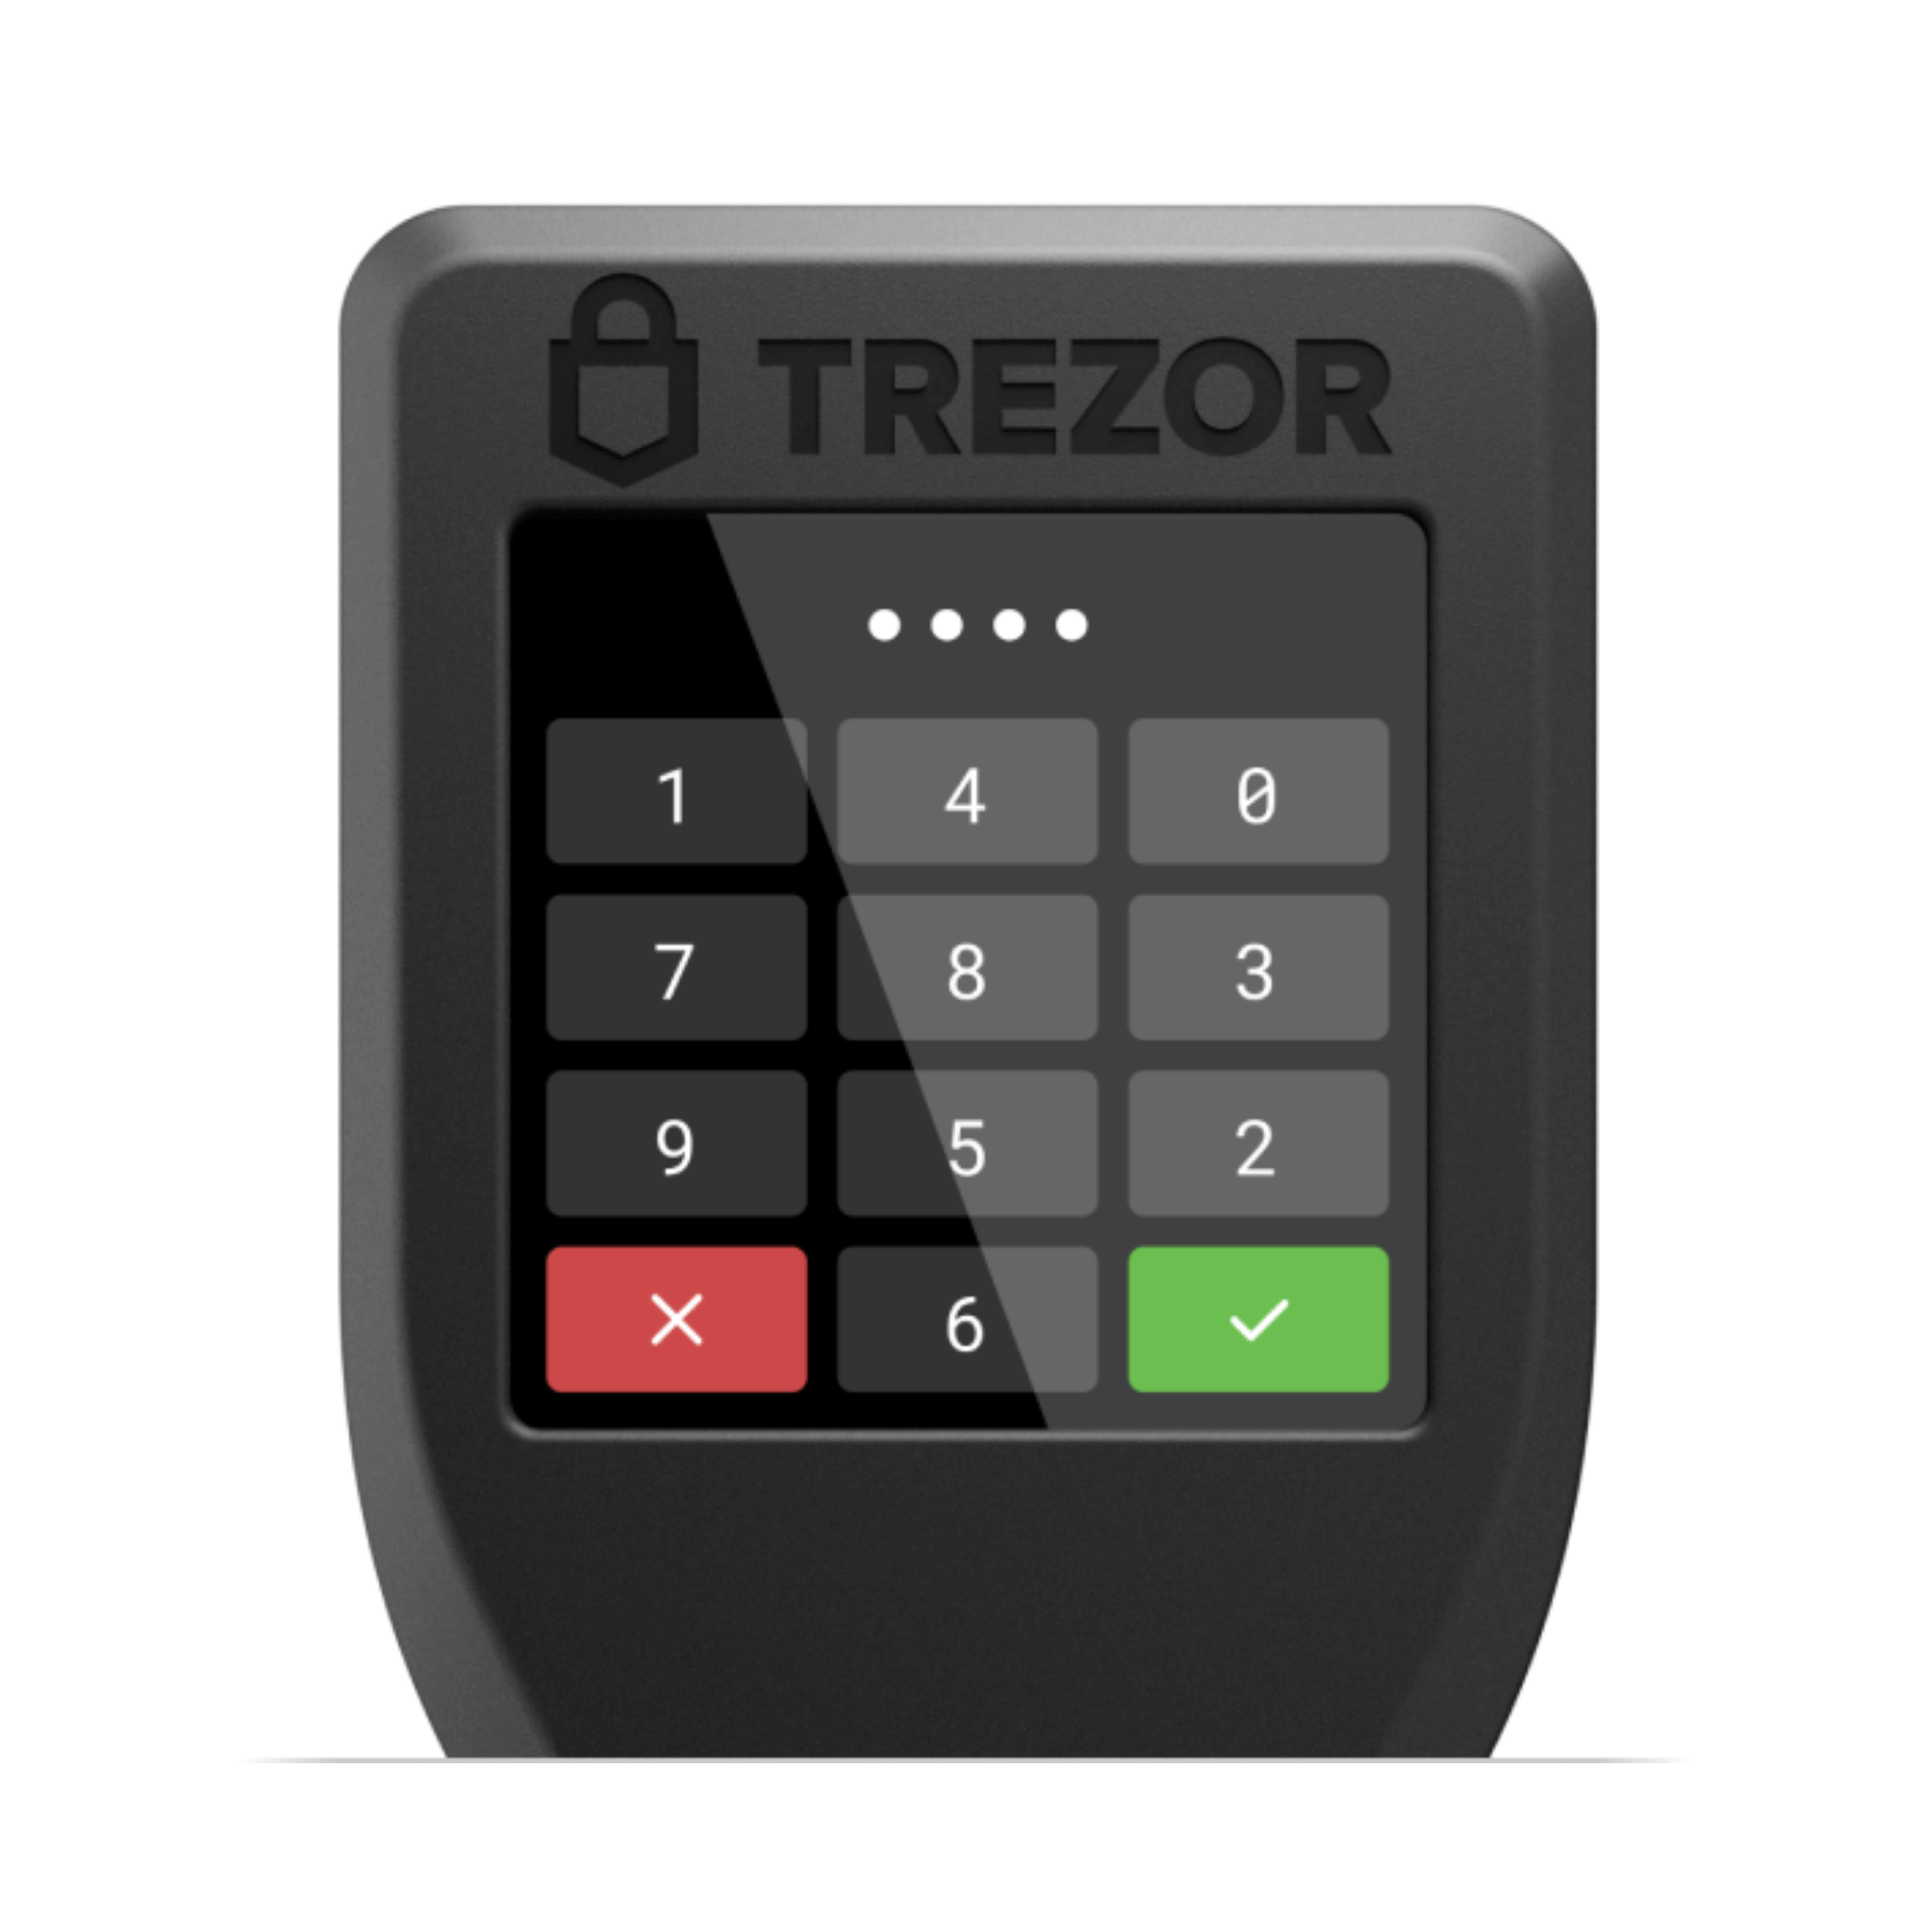 Trezor Model T Cryptocurrency Hardware Wallet Pin Feature